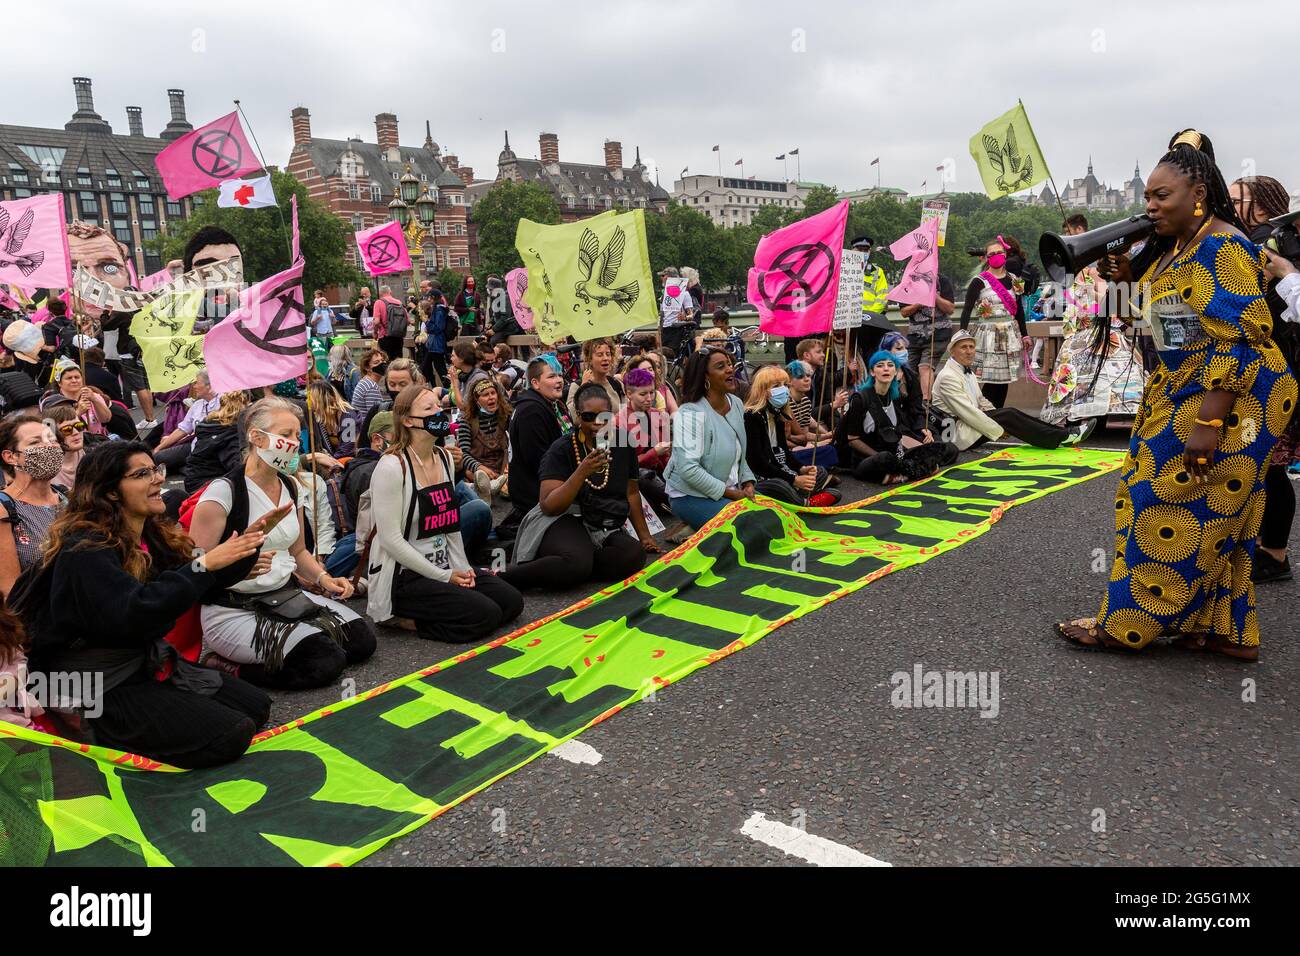 London, UK. 27th June, 2021. June 27, 2021 in London, England: Extinction Rebellion activists march at Southbank during a Free the Press protest. The Climate Change action group rally against the perceived control of the UK Media by just four powerful billionaires. (Photo by Dominika Zarzycka/Sipa USA) Credit: Sipa USA/Alamy Live News Stock Photo